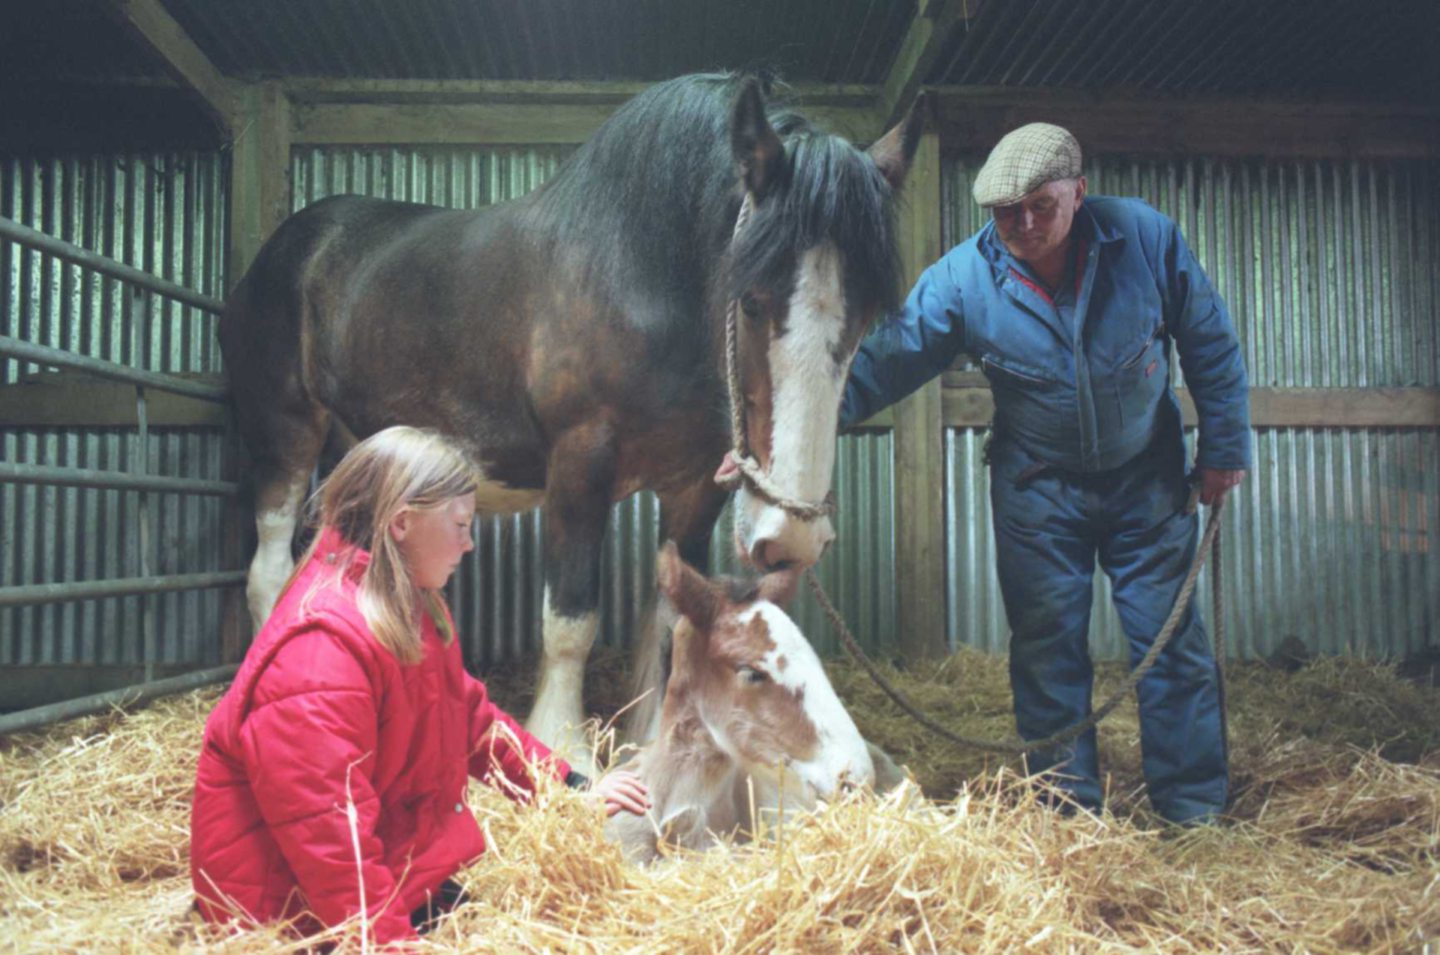 Young girl meeting Clydesdale horse Polly's days-old filly in 1997, as farmhand Albert Ewen looks on.